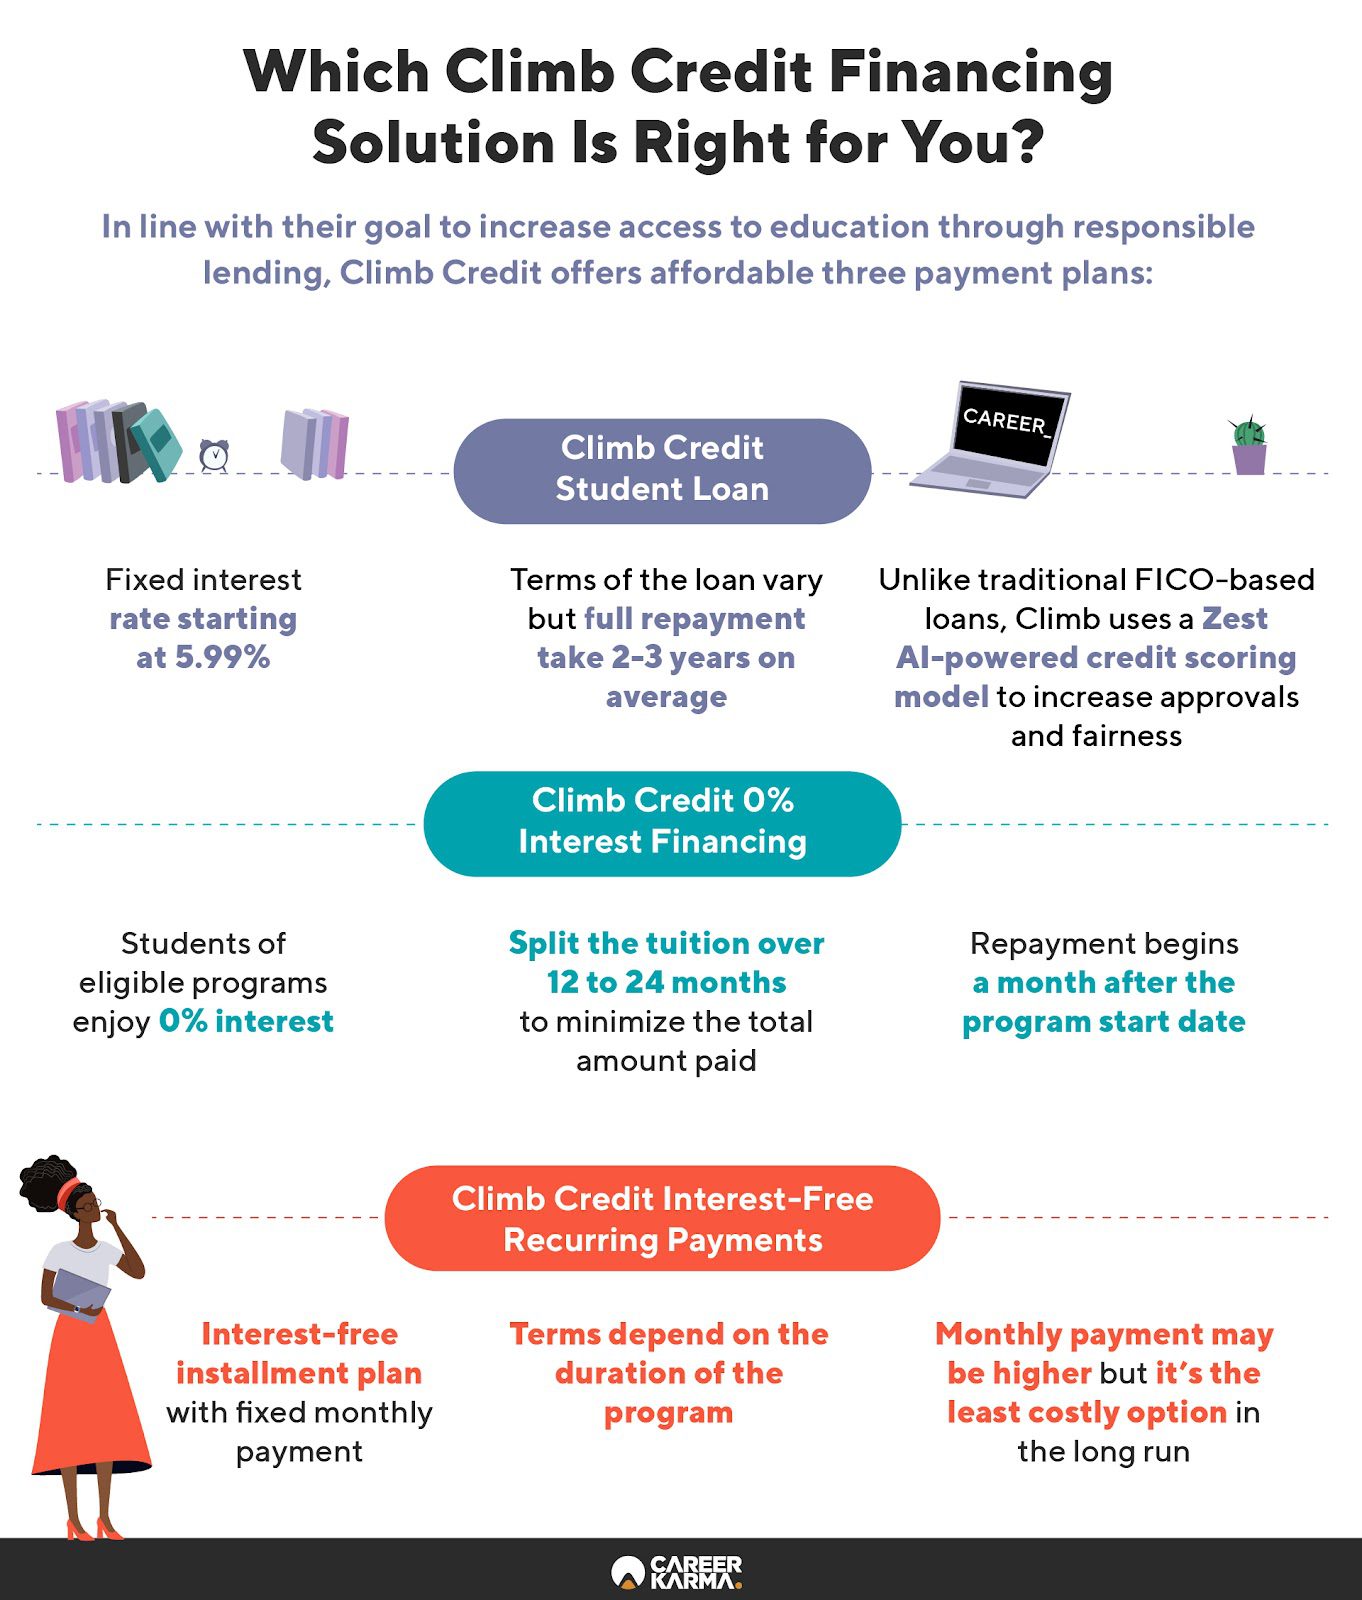 An infographic featuring Climb Credit’s payment solutions